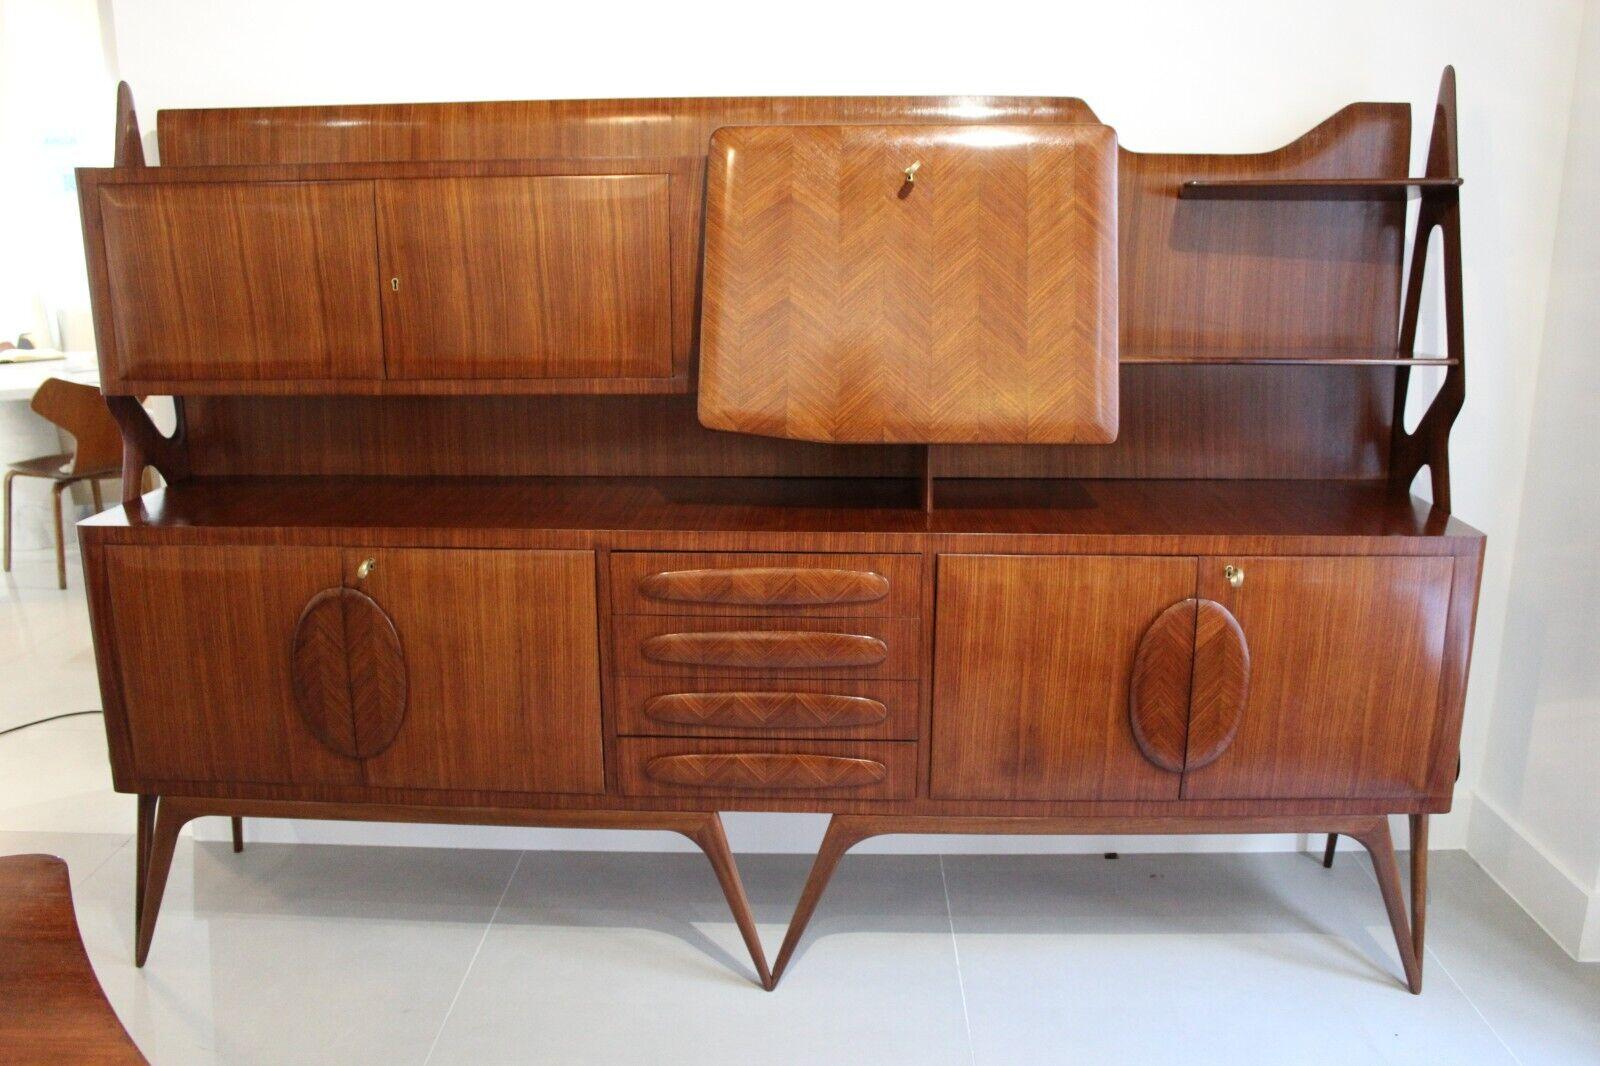 A very rare and superb example of a sideboard by Iconic Italian designer Ico Parisi, 1950's. 

This piece made from walnut has exceptional detailed cross banding inlay. 

Sculptural legs and frame, the body of the sideboard has lots of storage